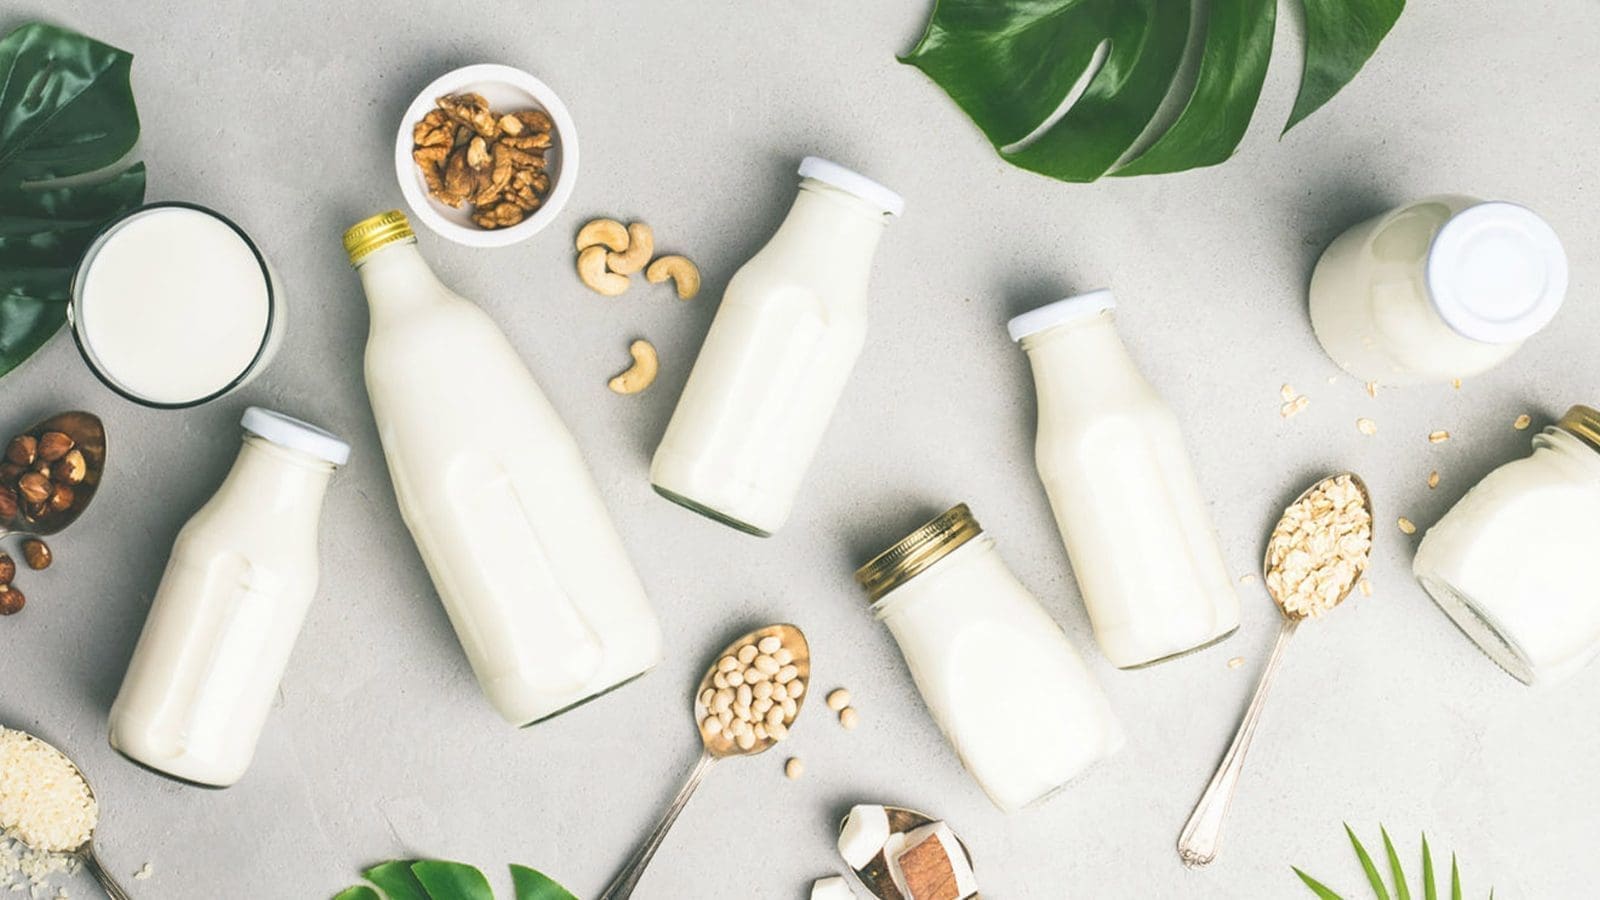 Microbial contaminants in plant-based dairy alternatives raise concerns for food safety